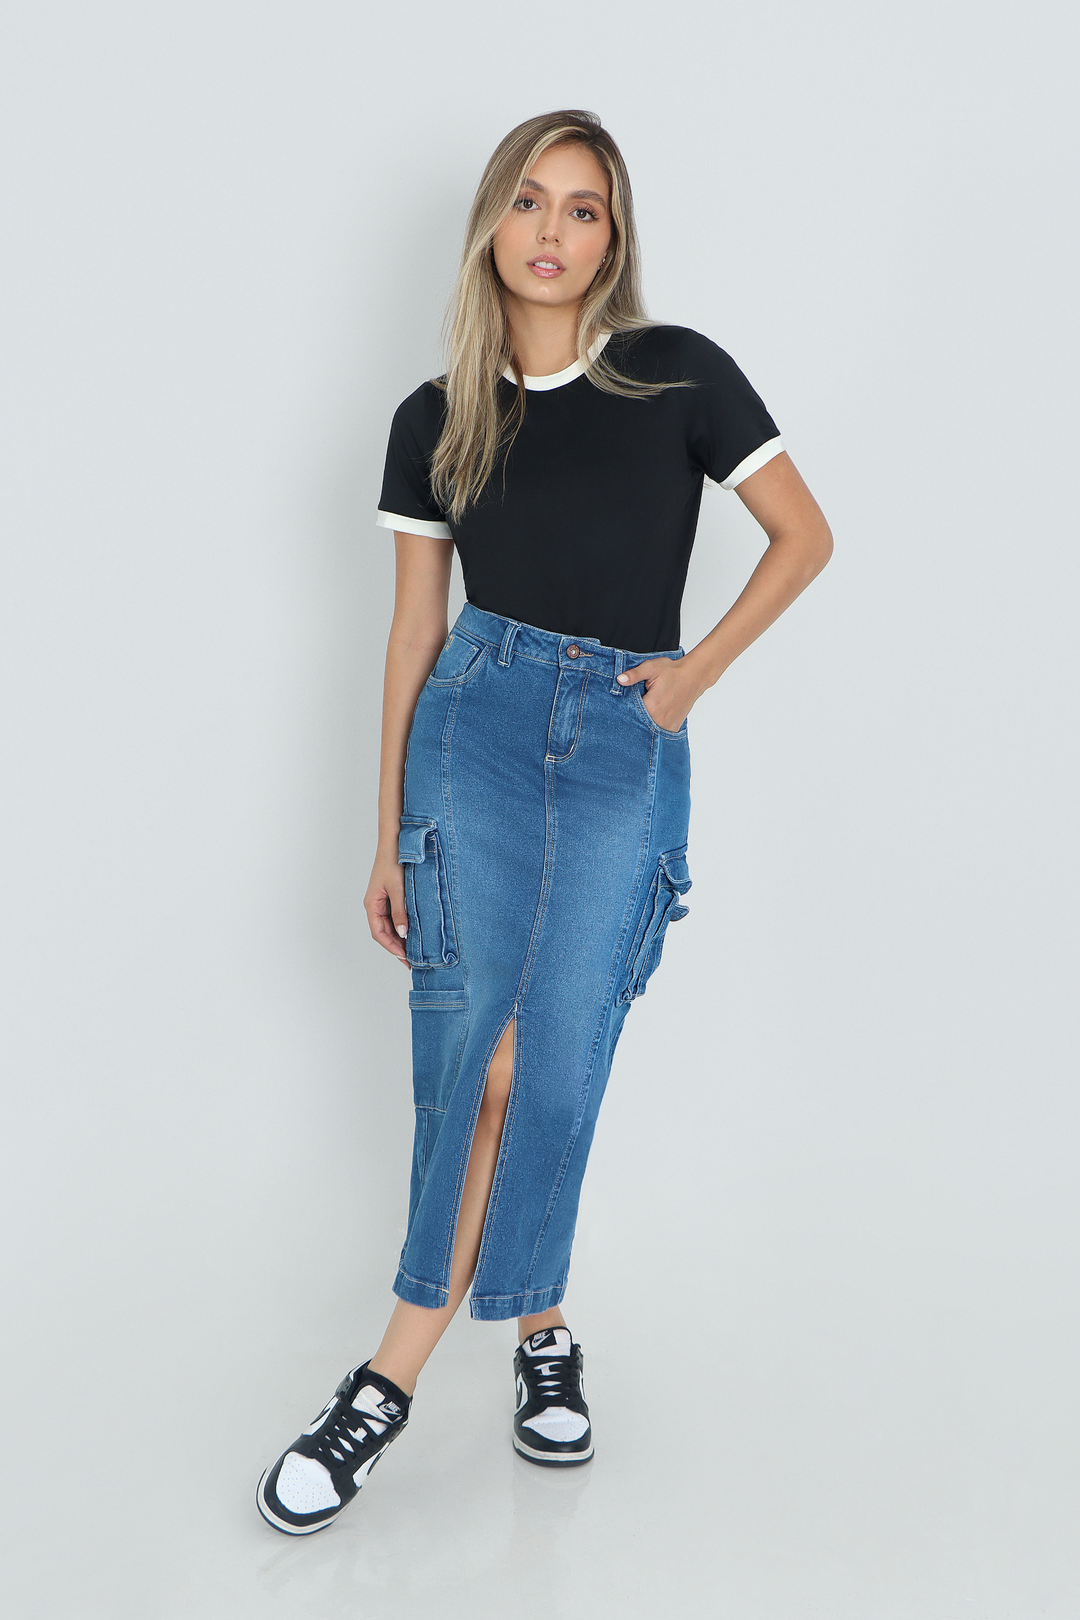 Jogger Dama REF, 213064 – Lixis Jeans